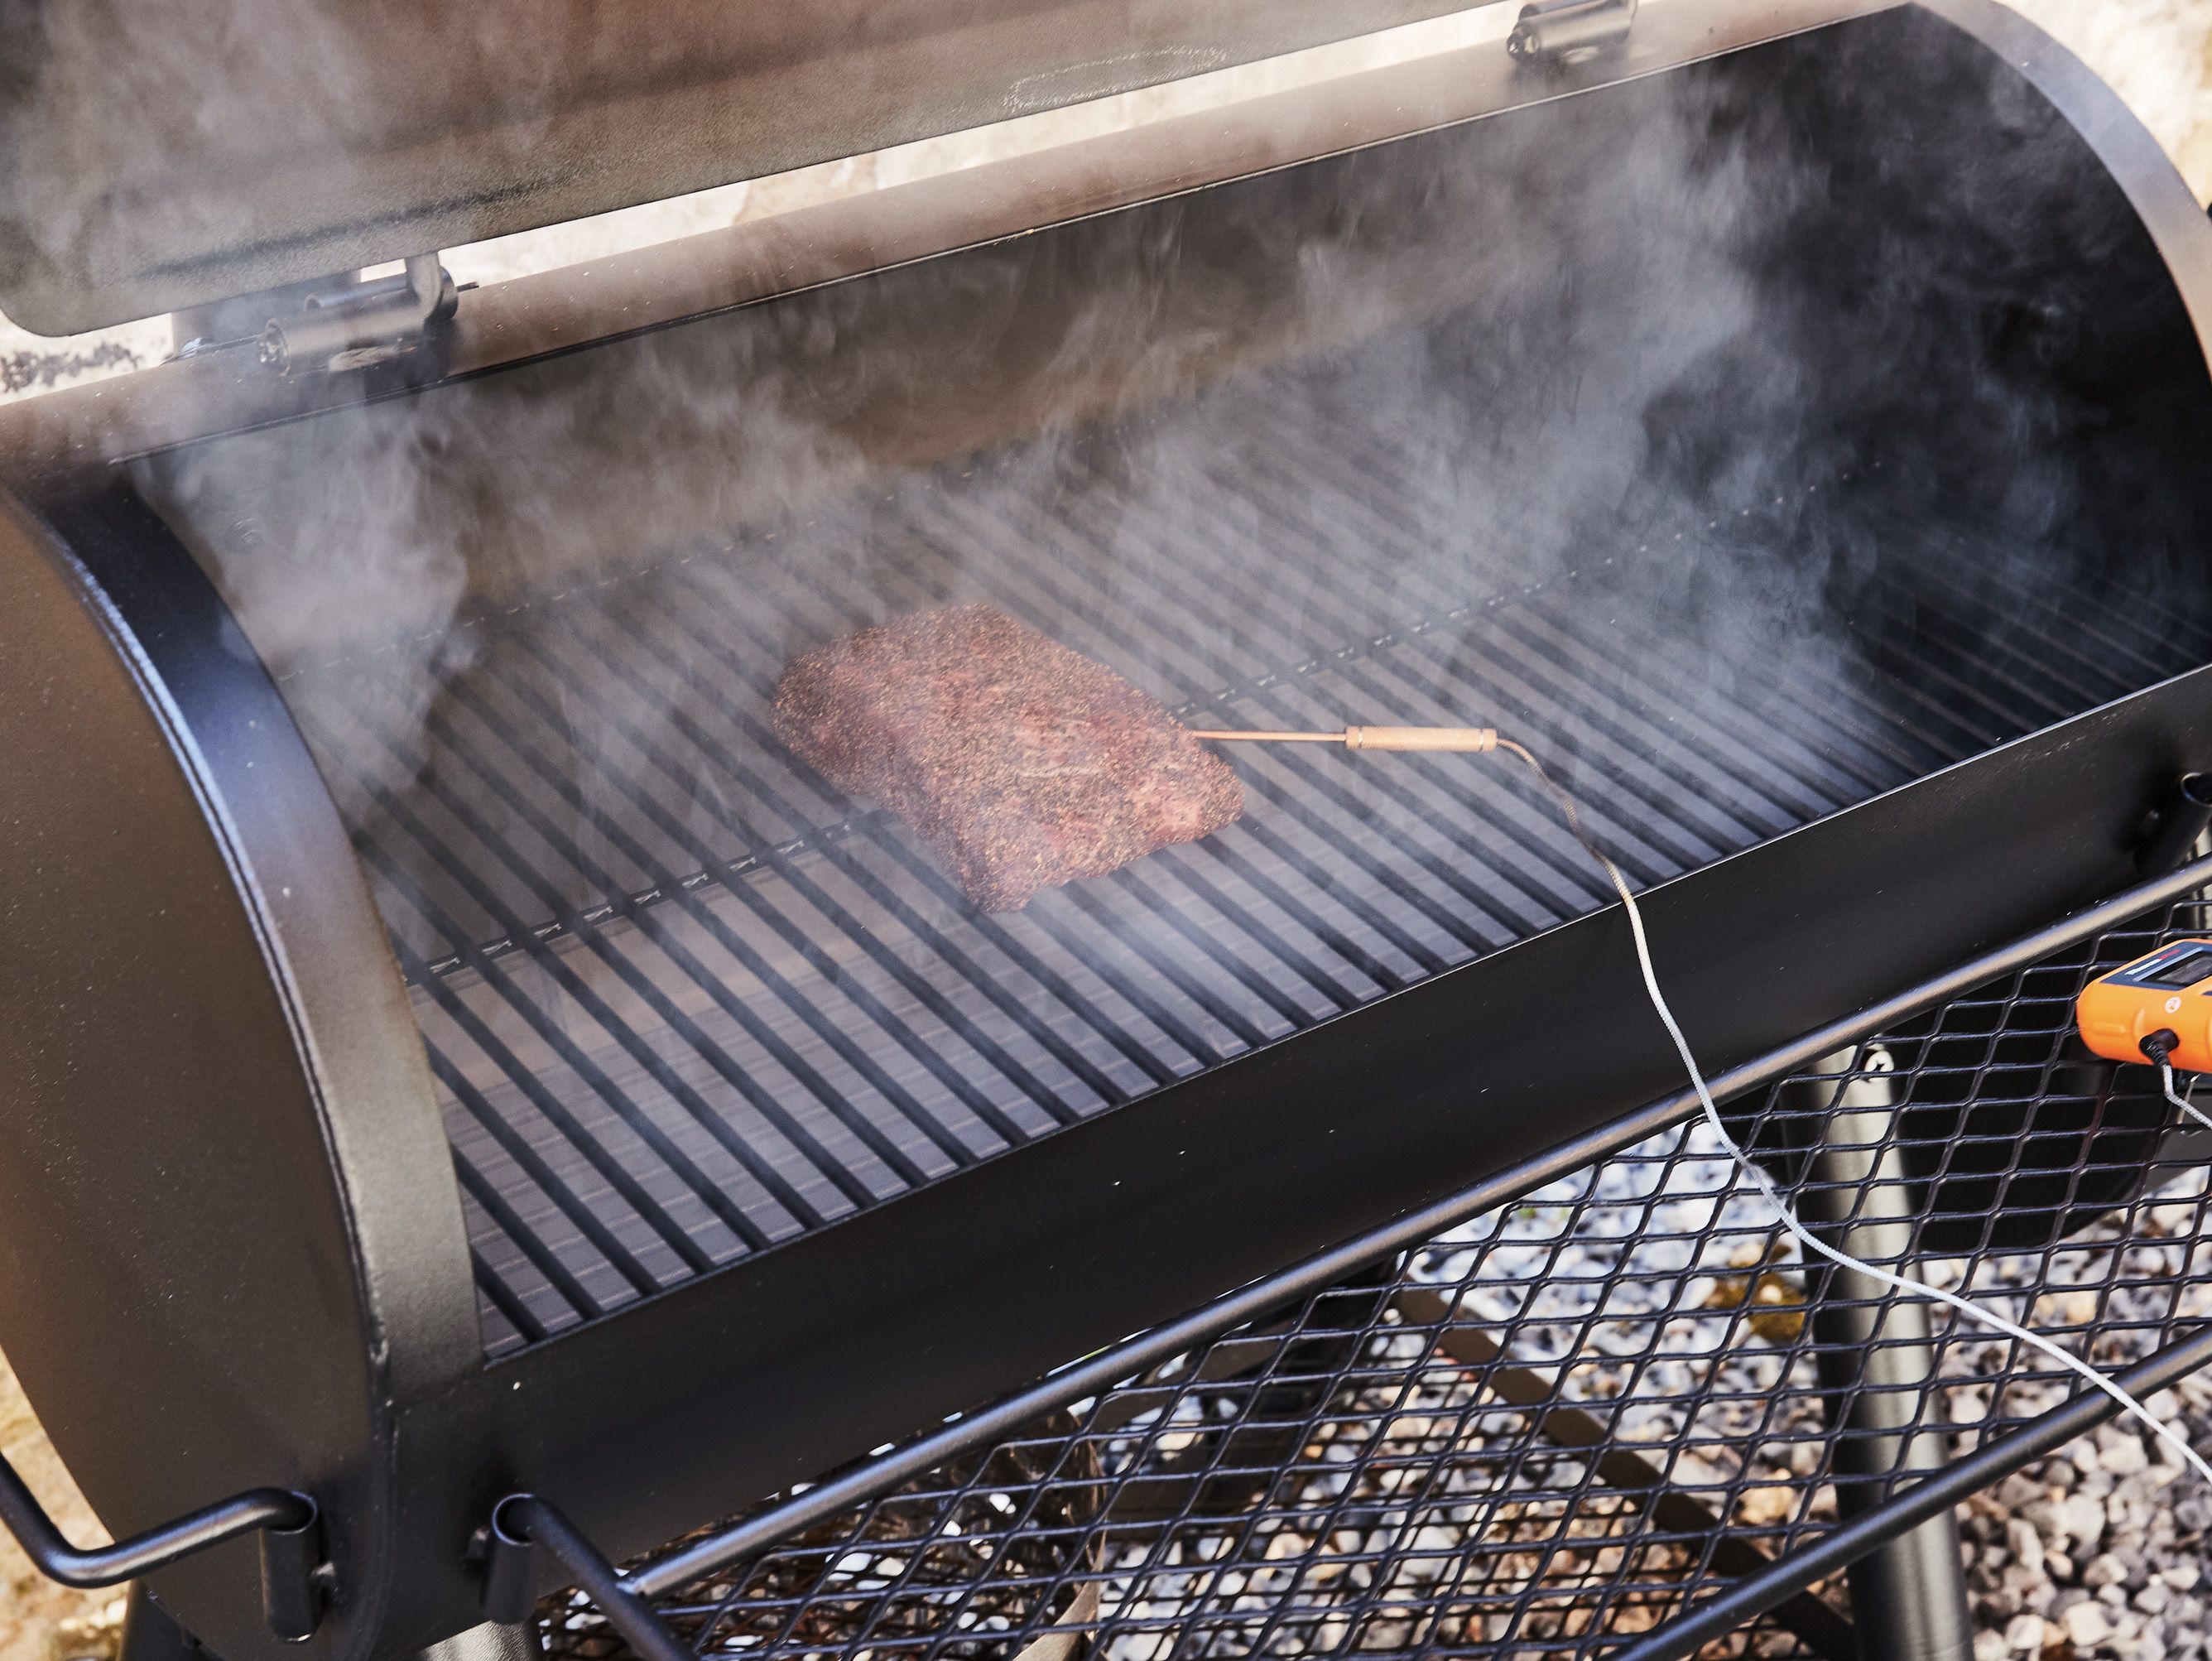 The Difference Between BBQ, Grilling, and Smoking